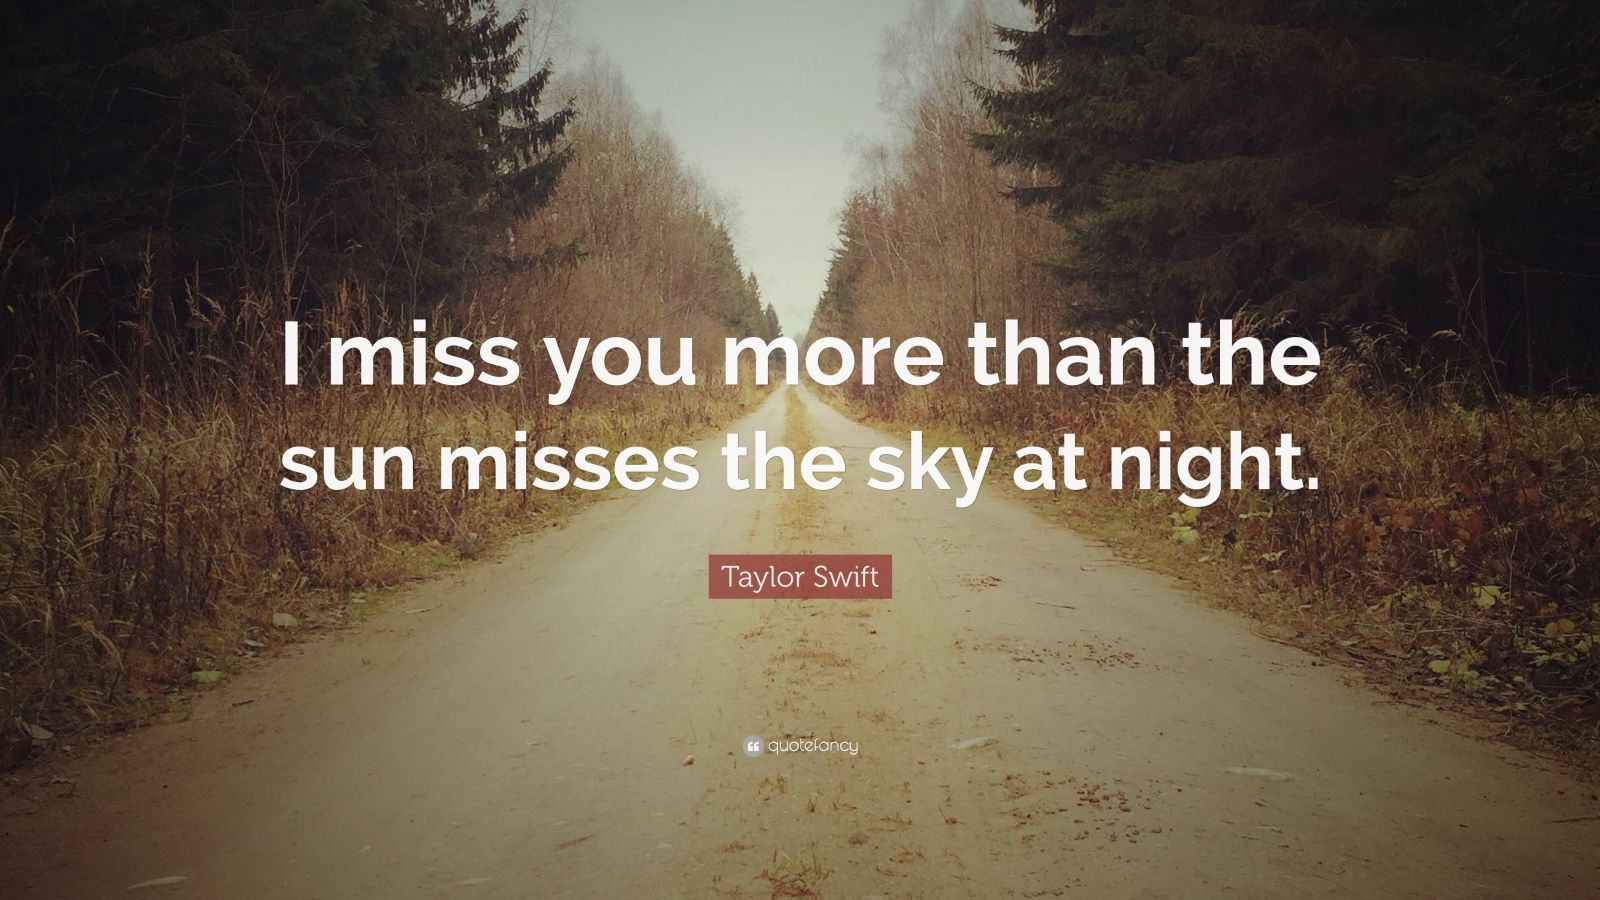 Taylor Swift Quote: “I miss you more than the sun misses the sky at